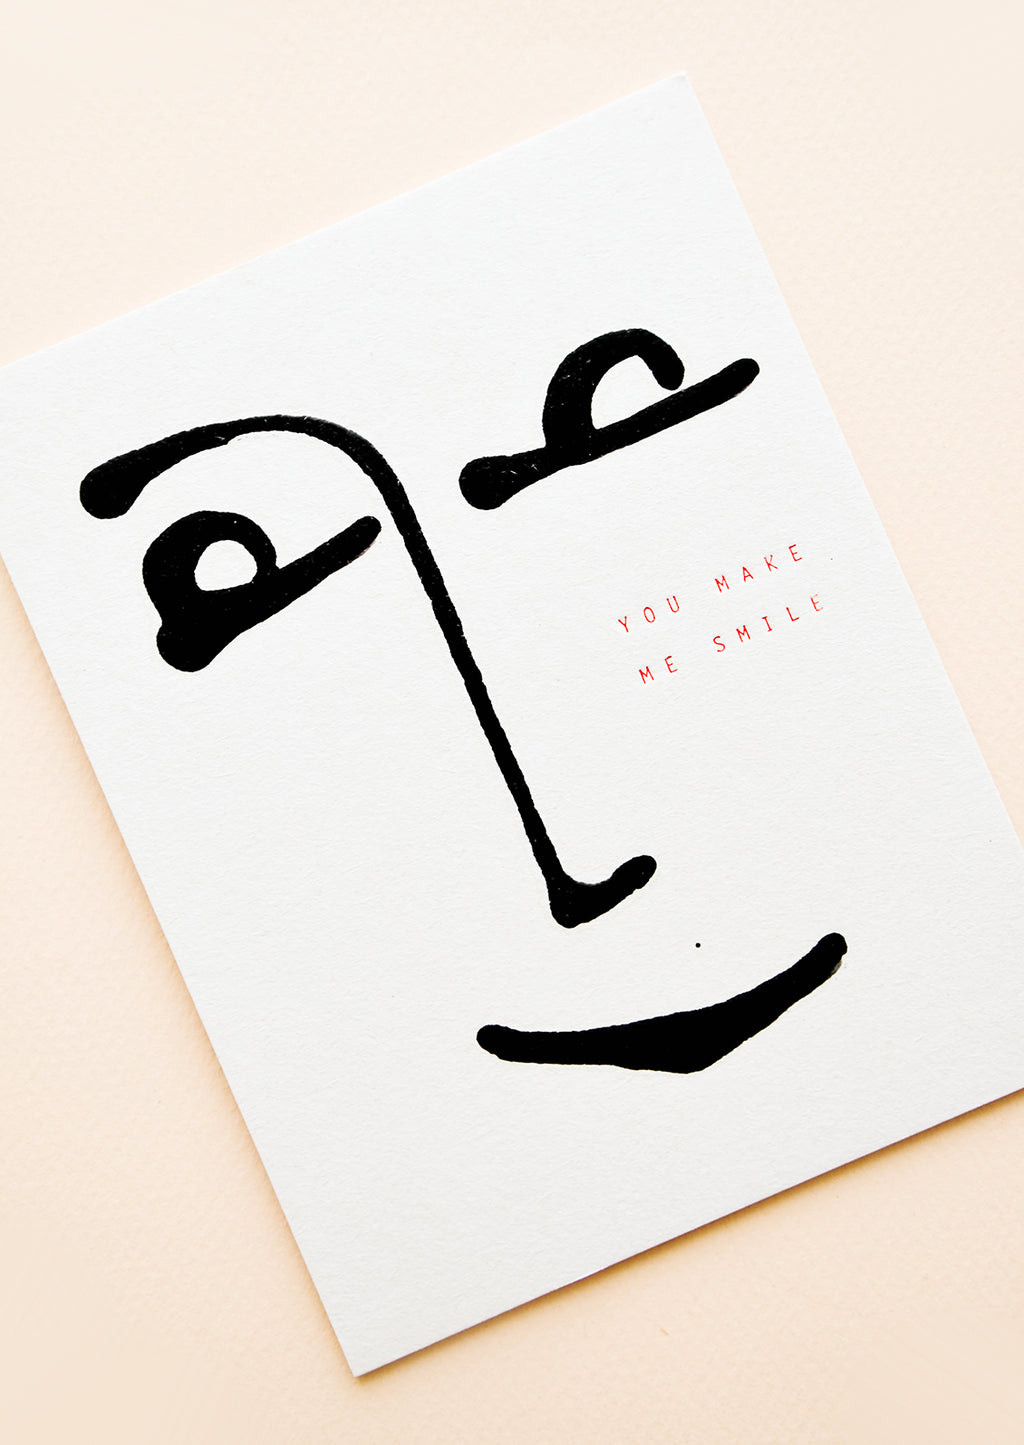 2: White minimalist greeting card with a simple black drawing of a smiling face and the words "you make me smile" in gold foil.